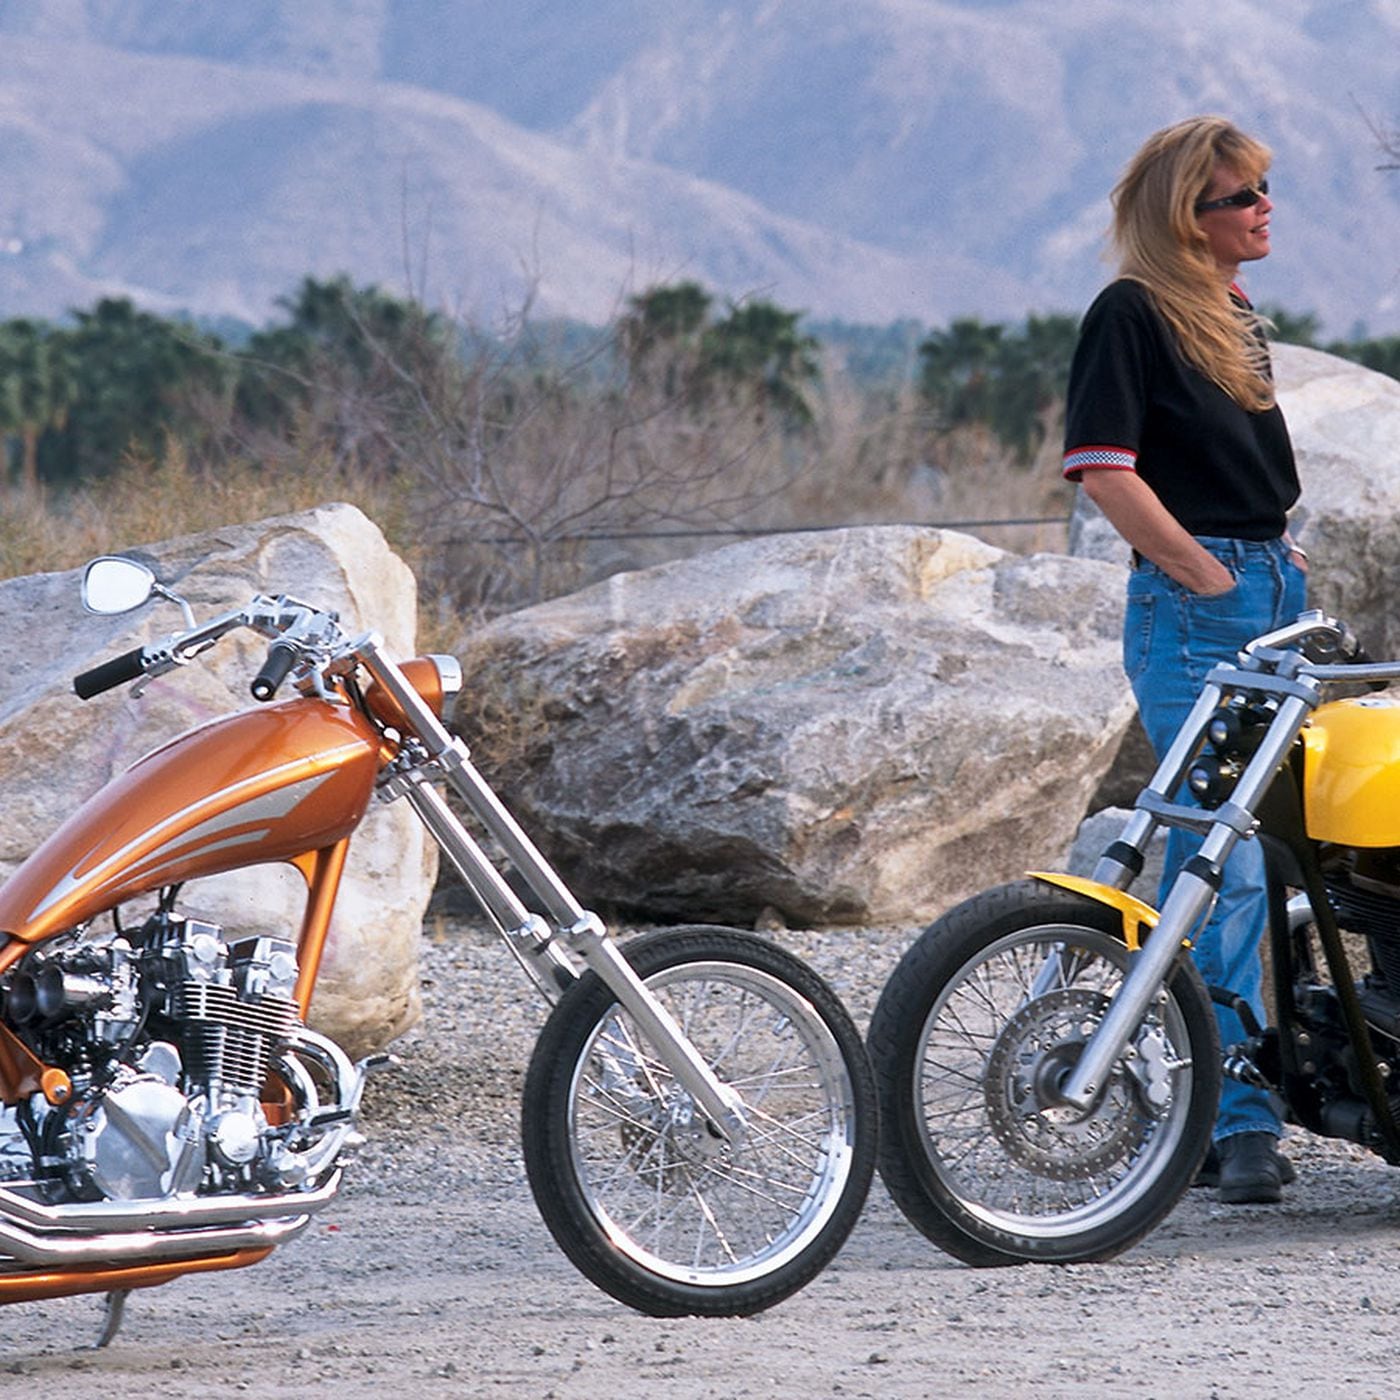 Chopper, Best Motorcycles, Totally Rad Choppers